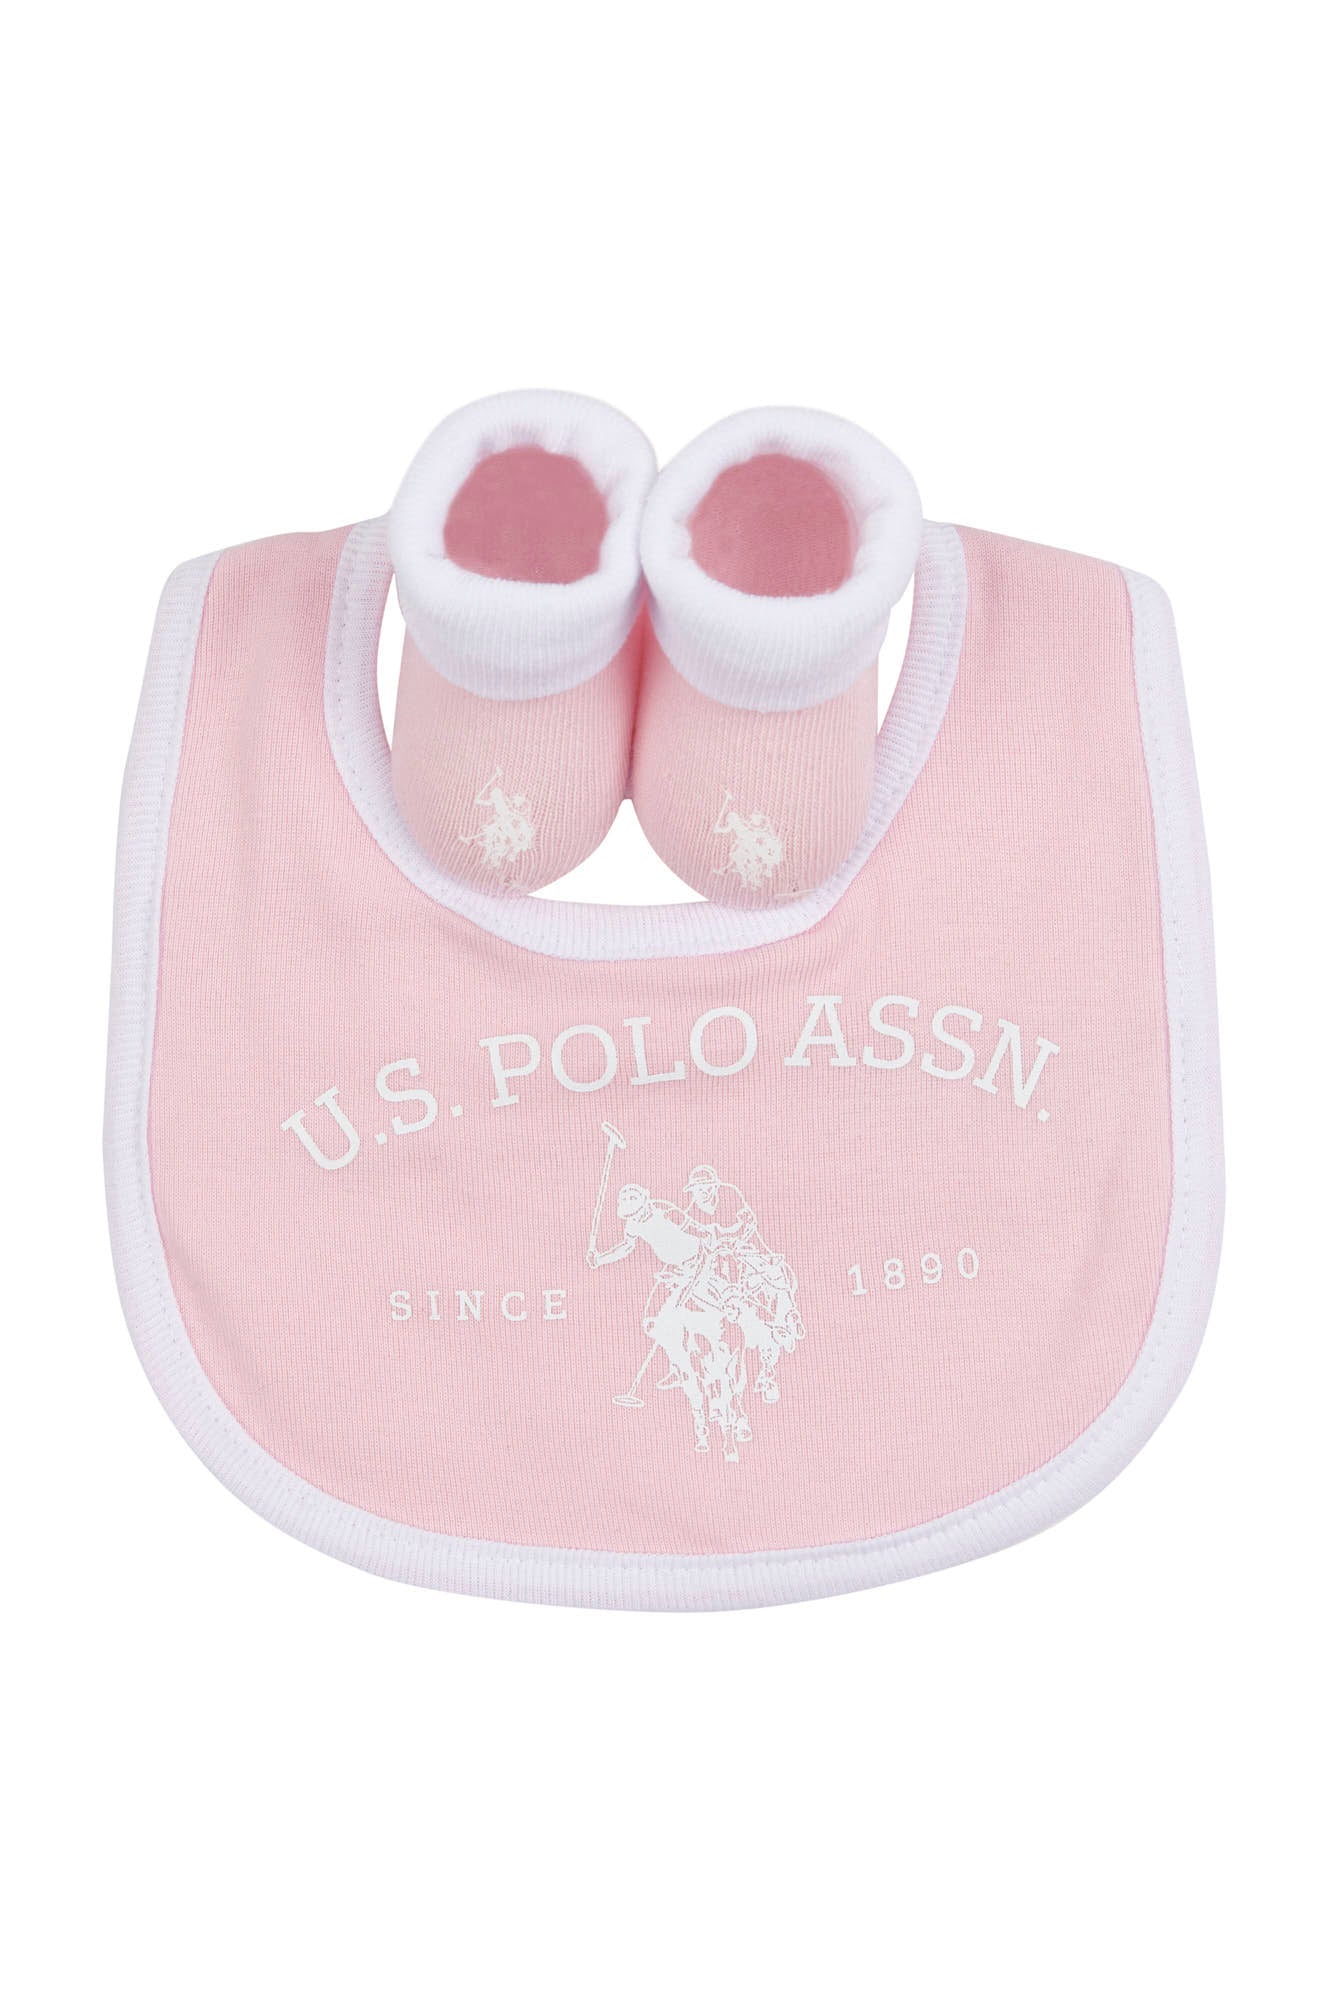 U.S. Polo Assn. Baby Bib and Bootie set in Light Pink